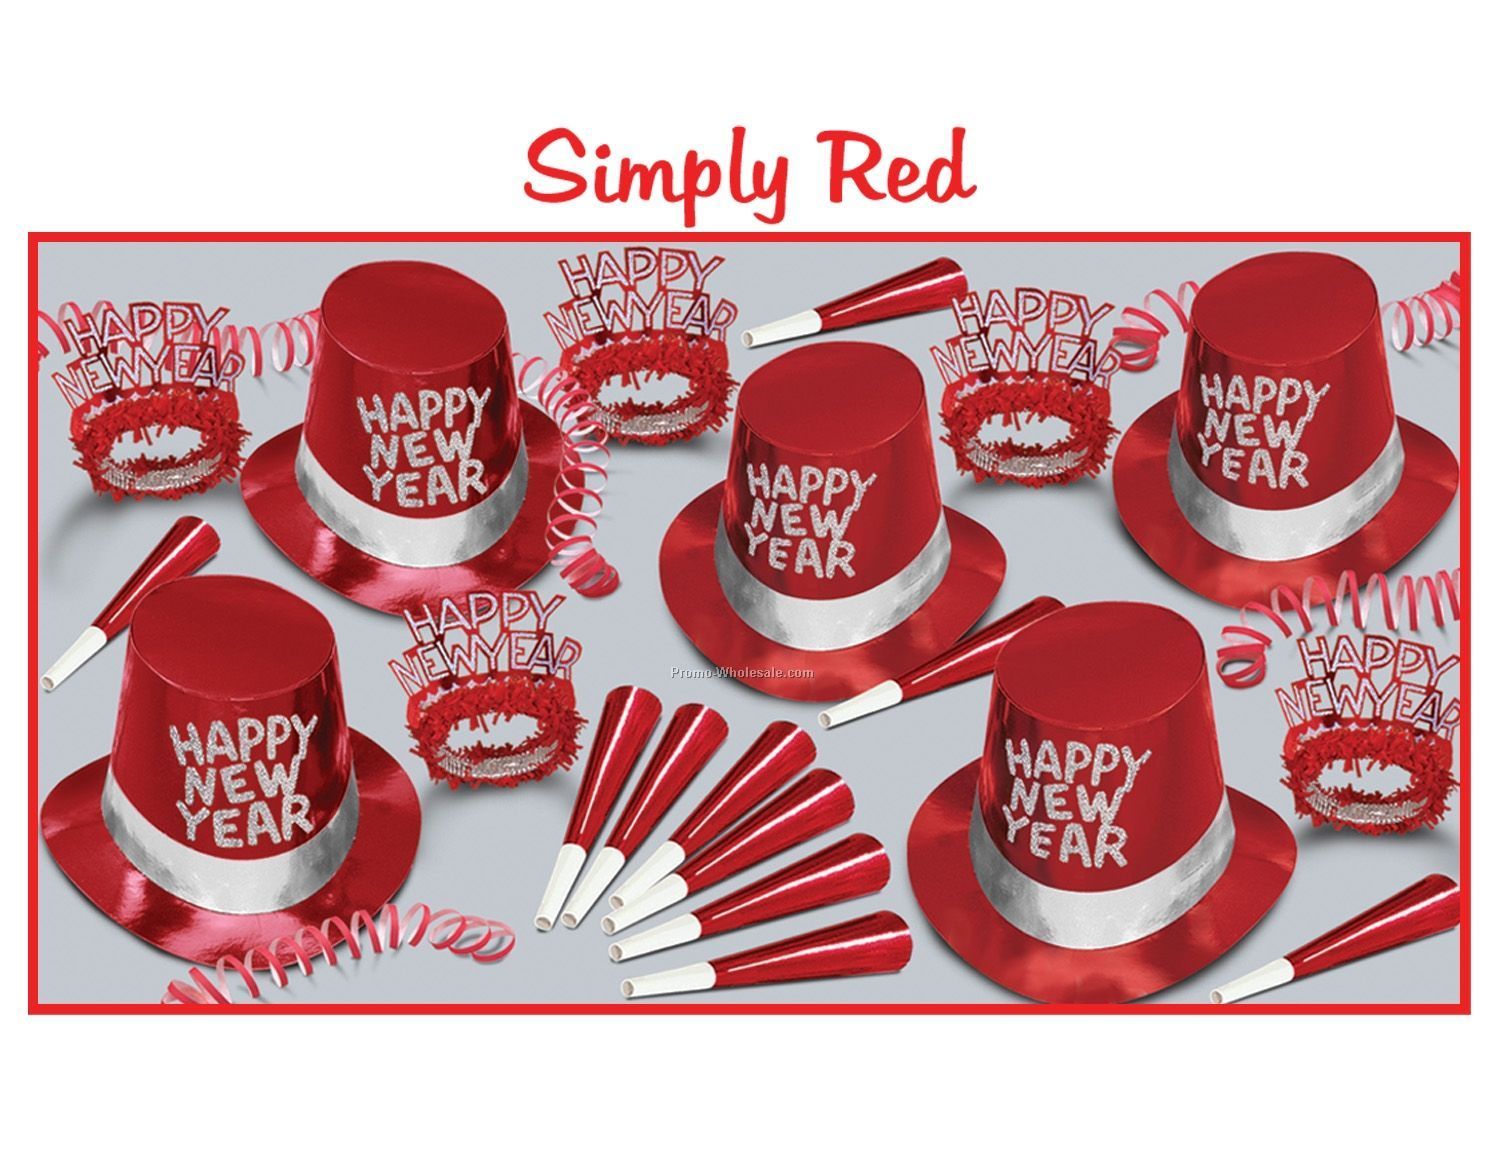 Simply Red Assortment For 50